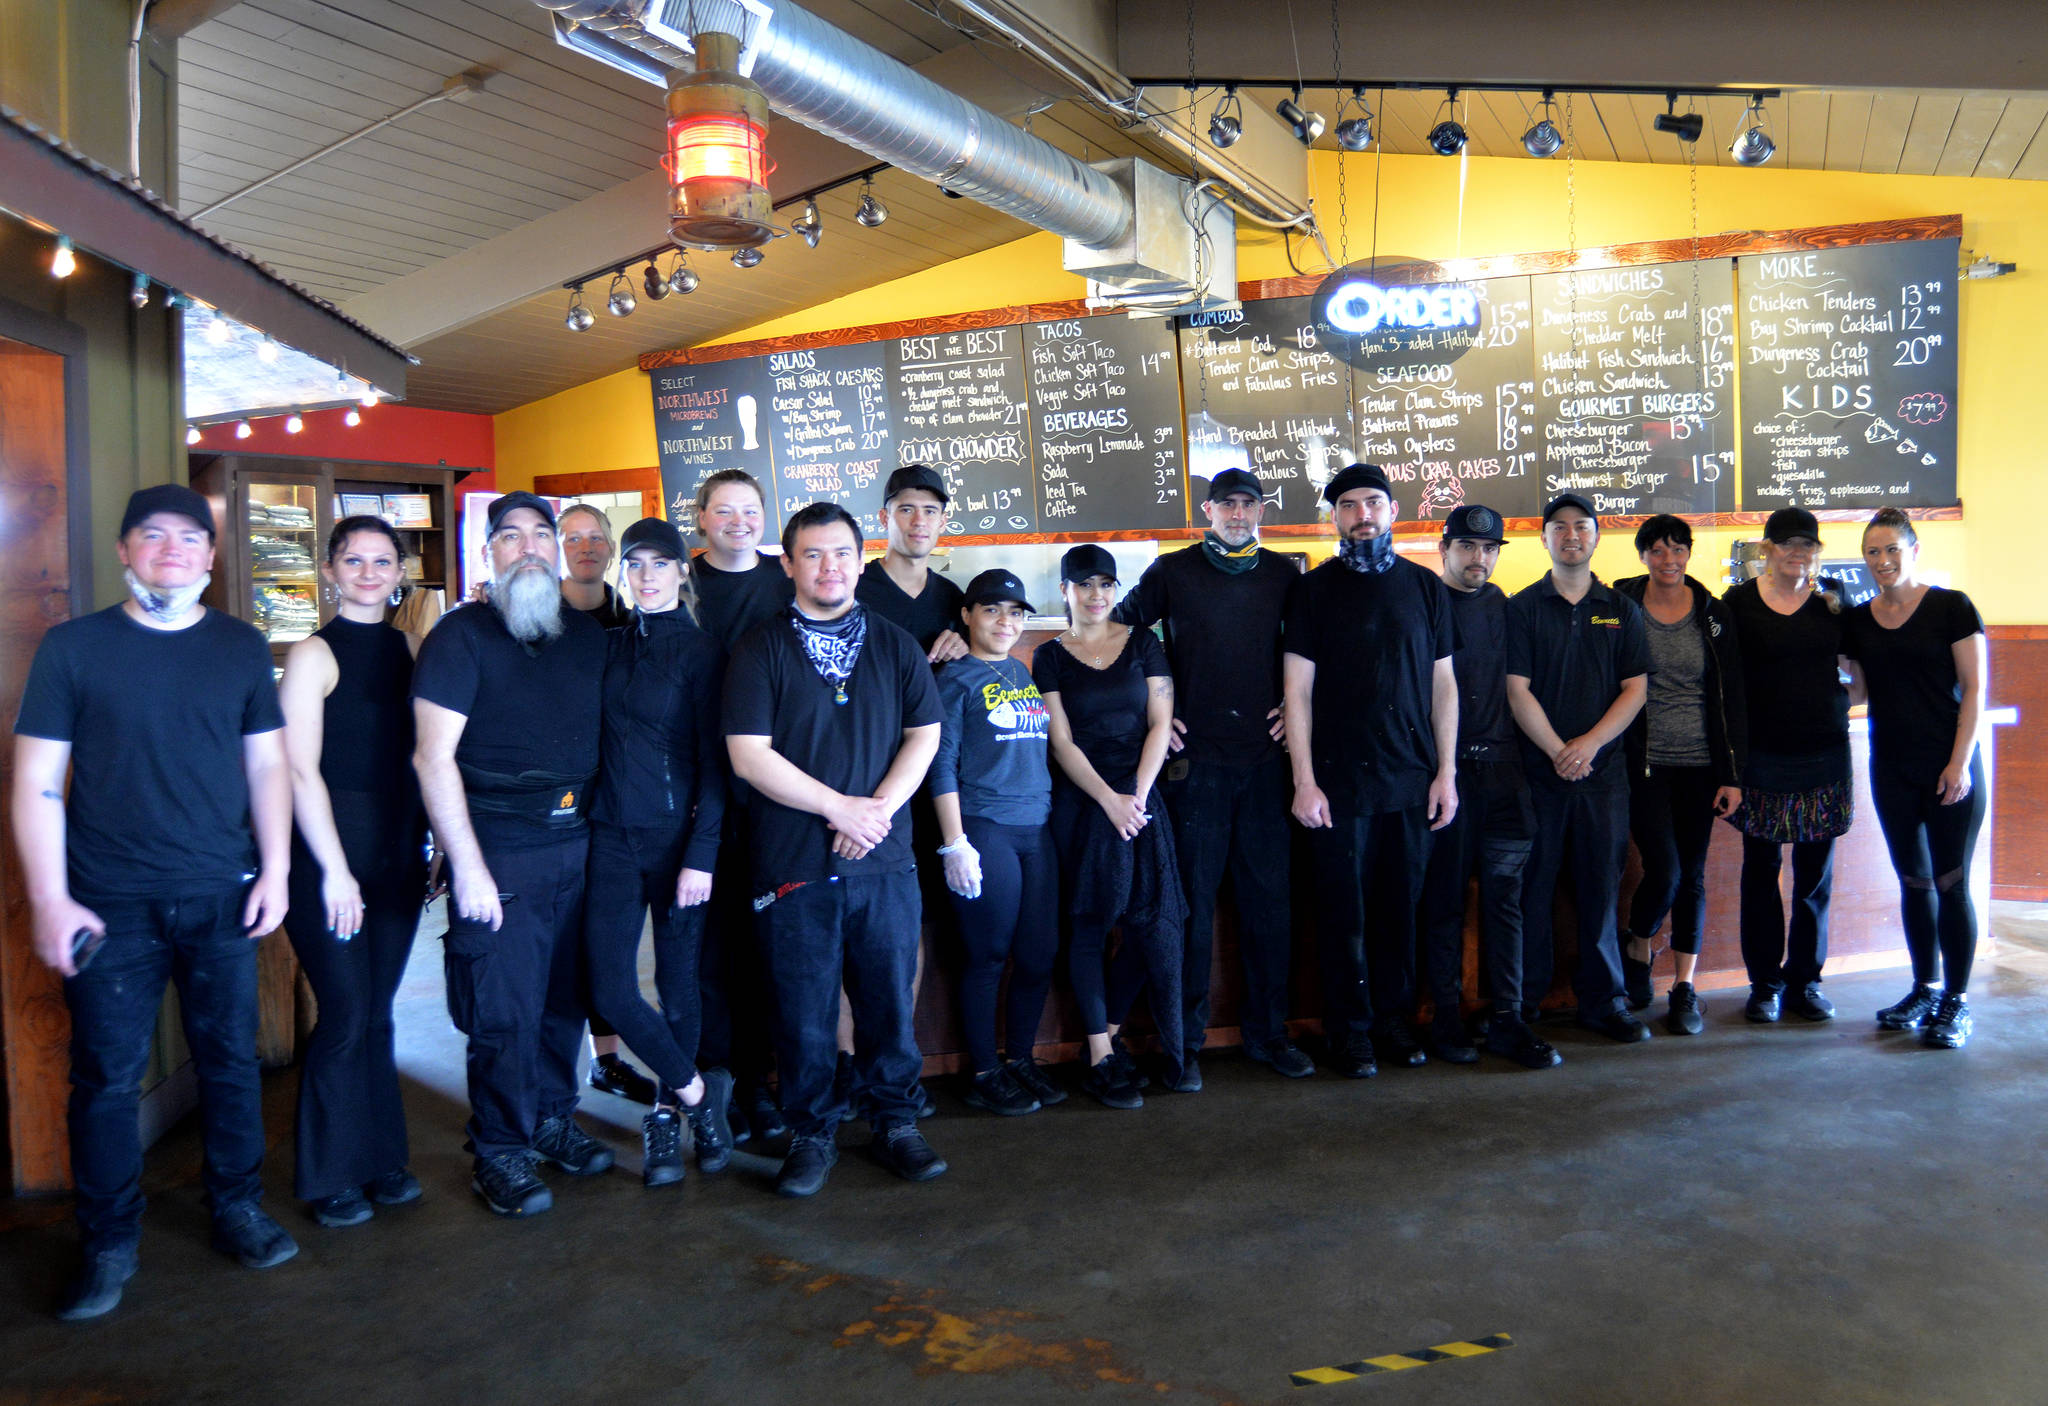 Employees of Bennett’s Fish Shack in Ocean Shores took a moment out of their busy lunch rush Friday to pose for a photo, which was followed by a round of applause from the diners.